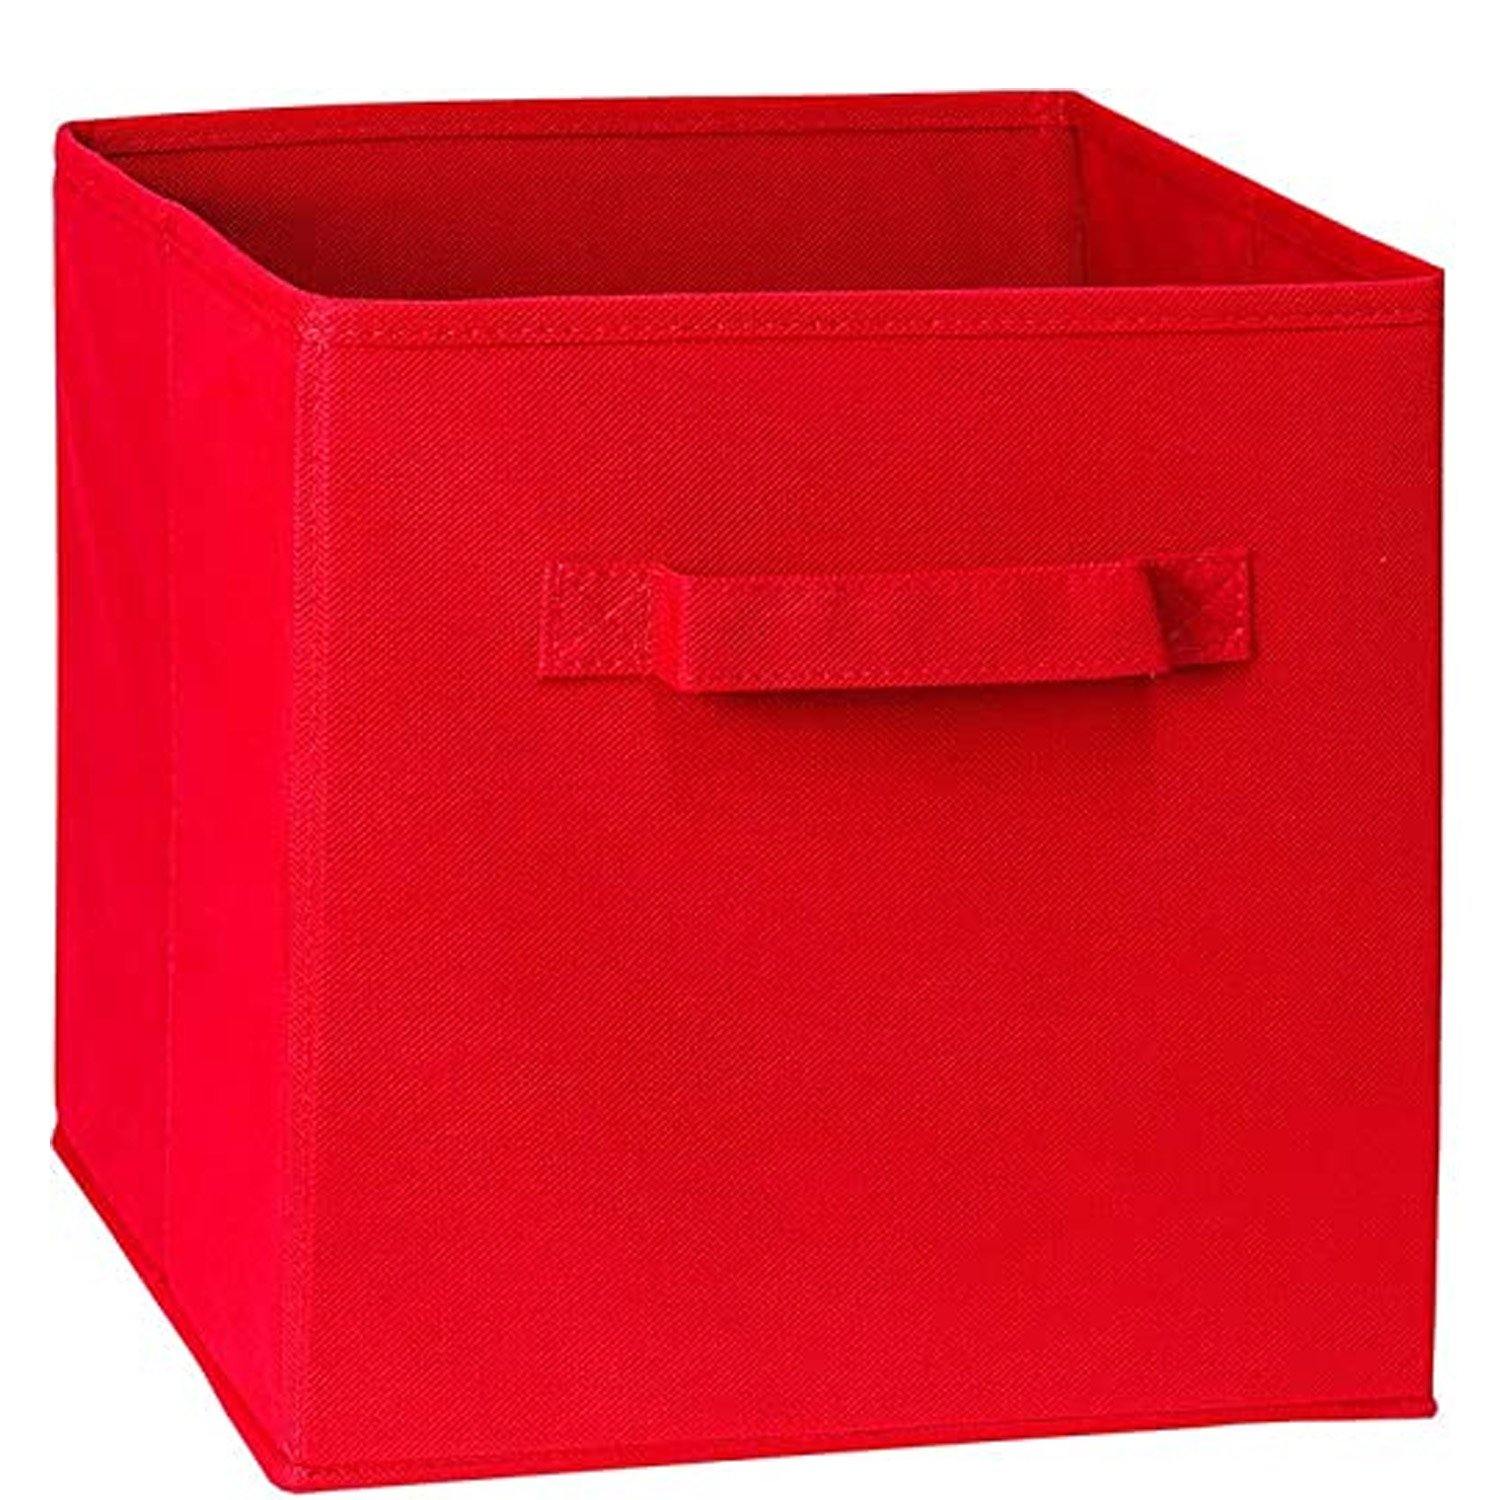 Double R Bags Storage Cubes Non-woven Fabric Storage Bins | Cube Storage Bins for Home and Office Medium 1 - Double R Bags